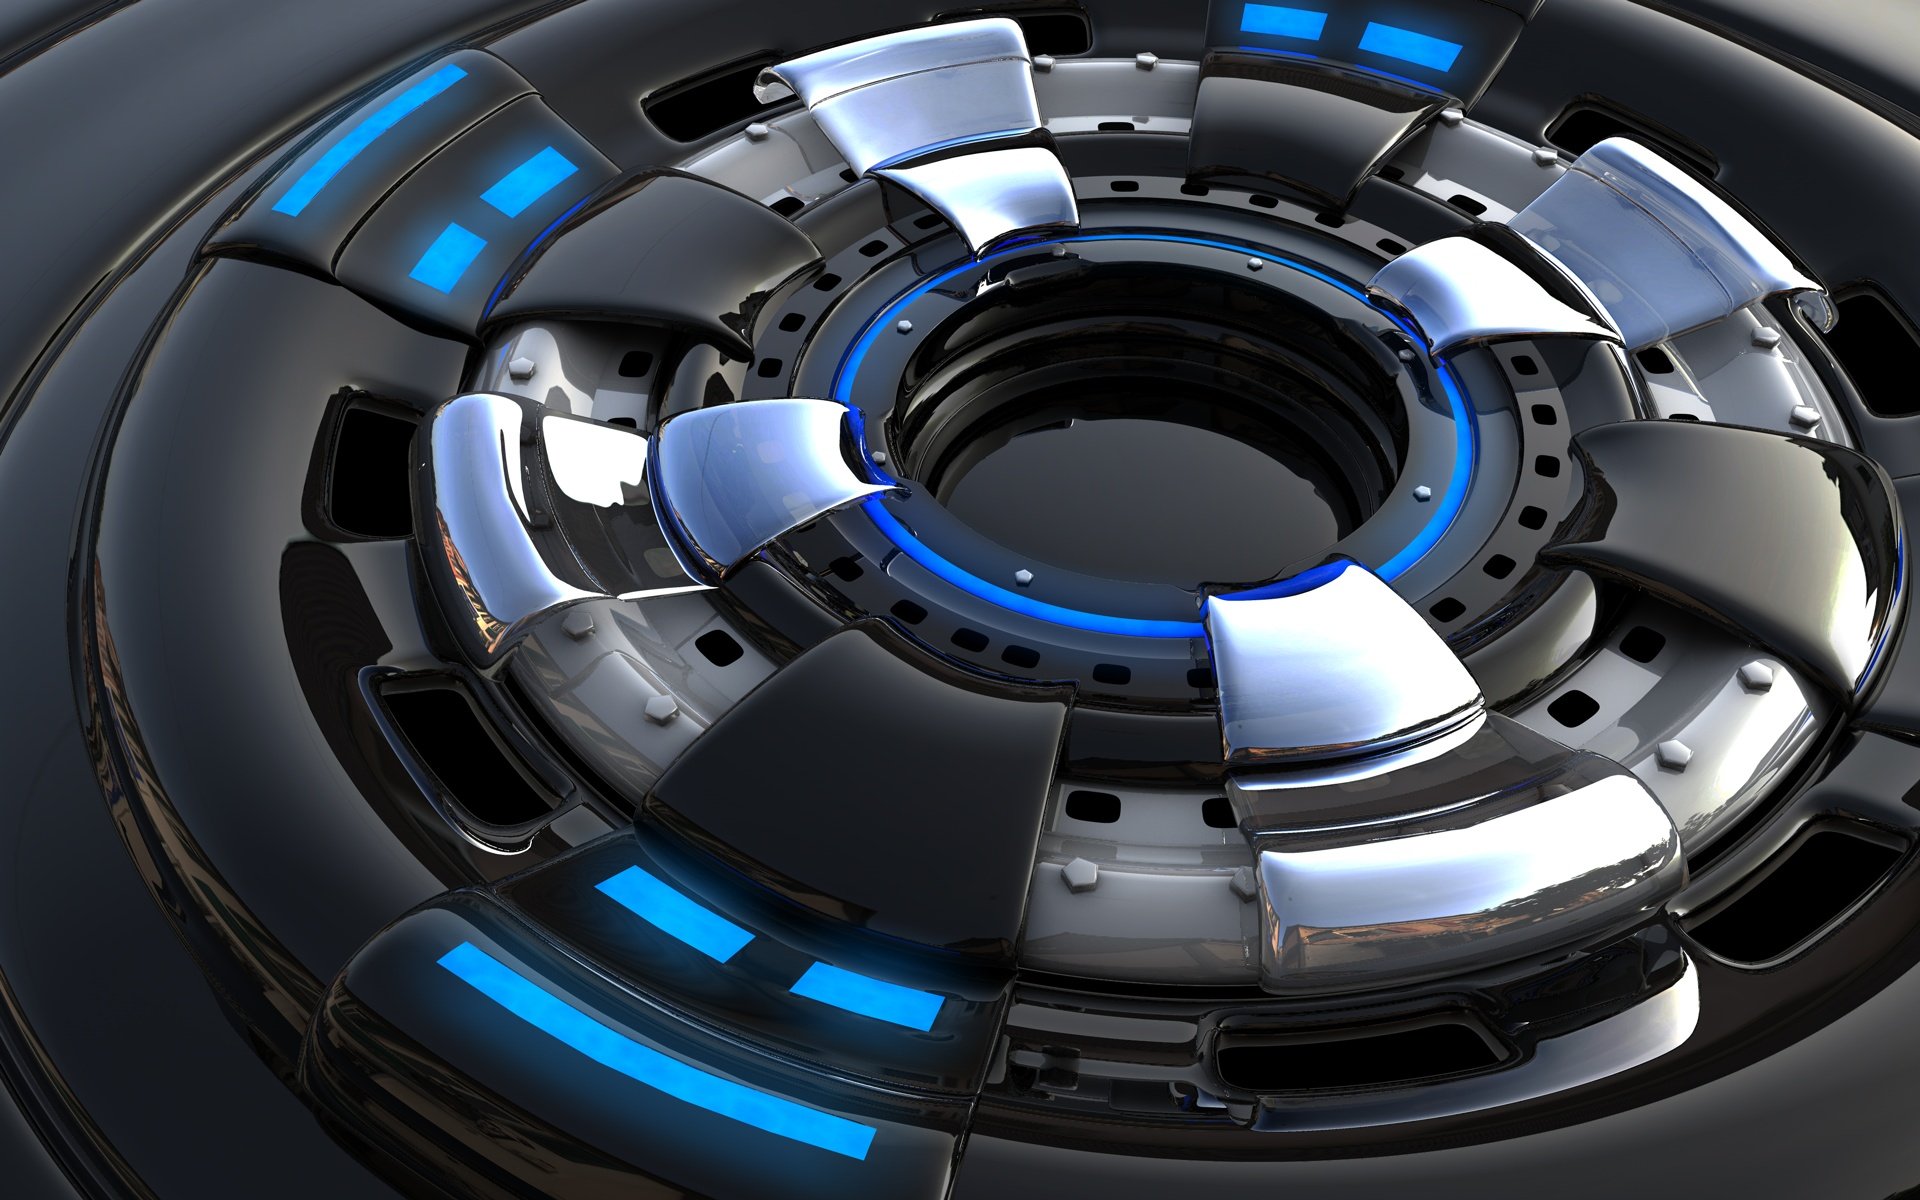 CINEMA 4D WALLPAPER by Drharney on